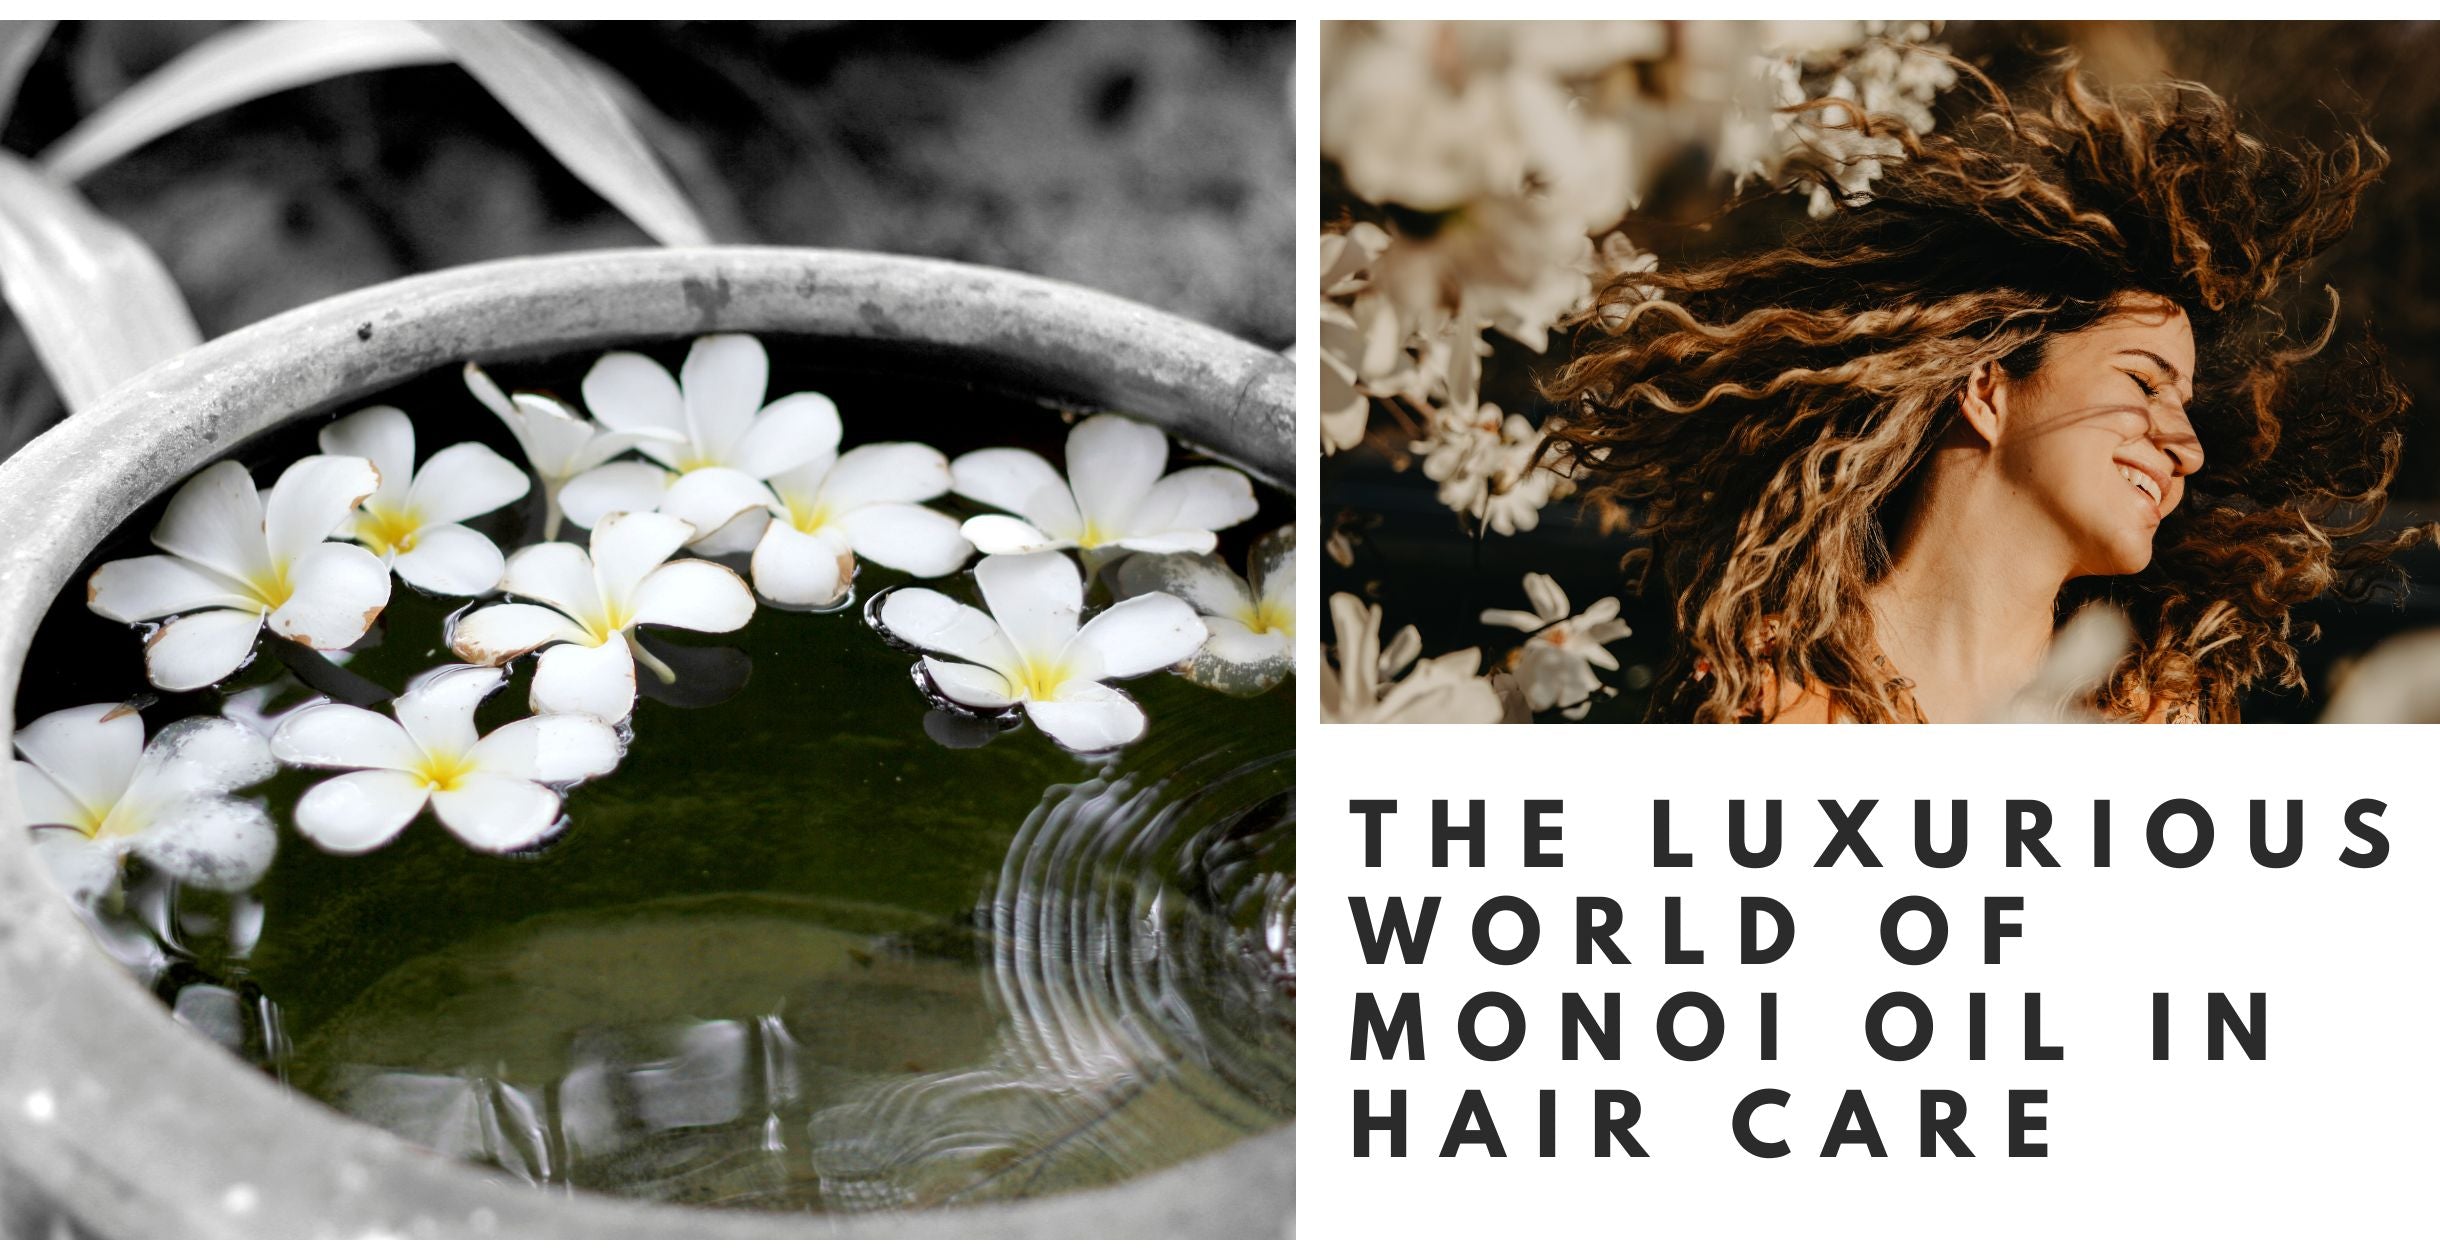 The Luxurious World of Monoi Oil in Hair Care